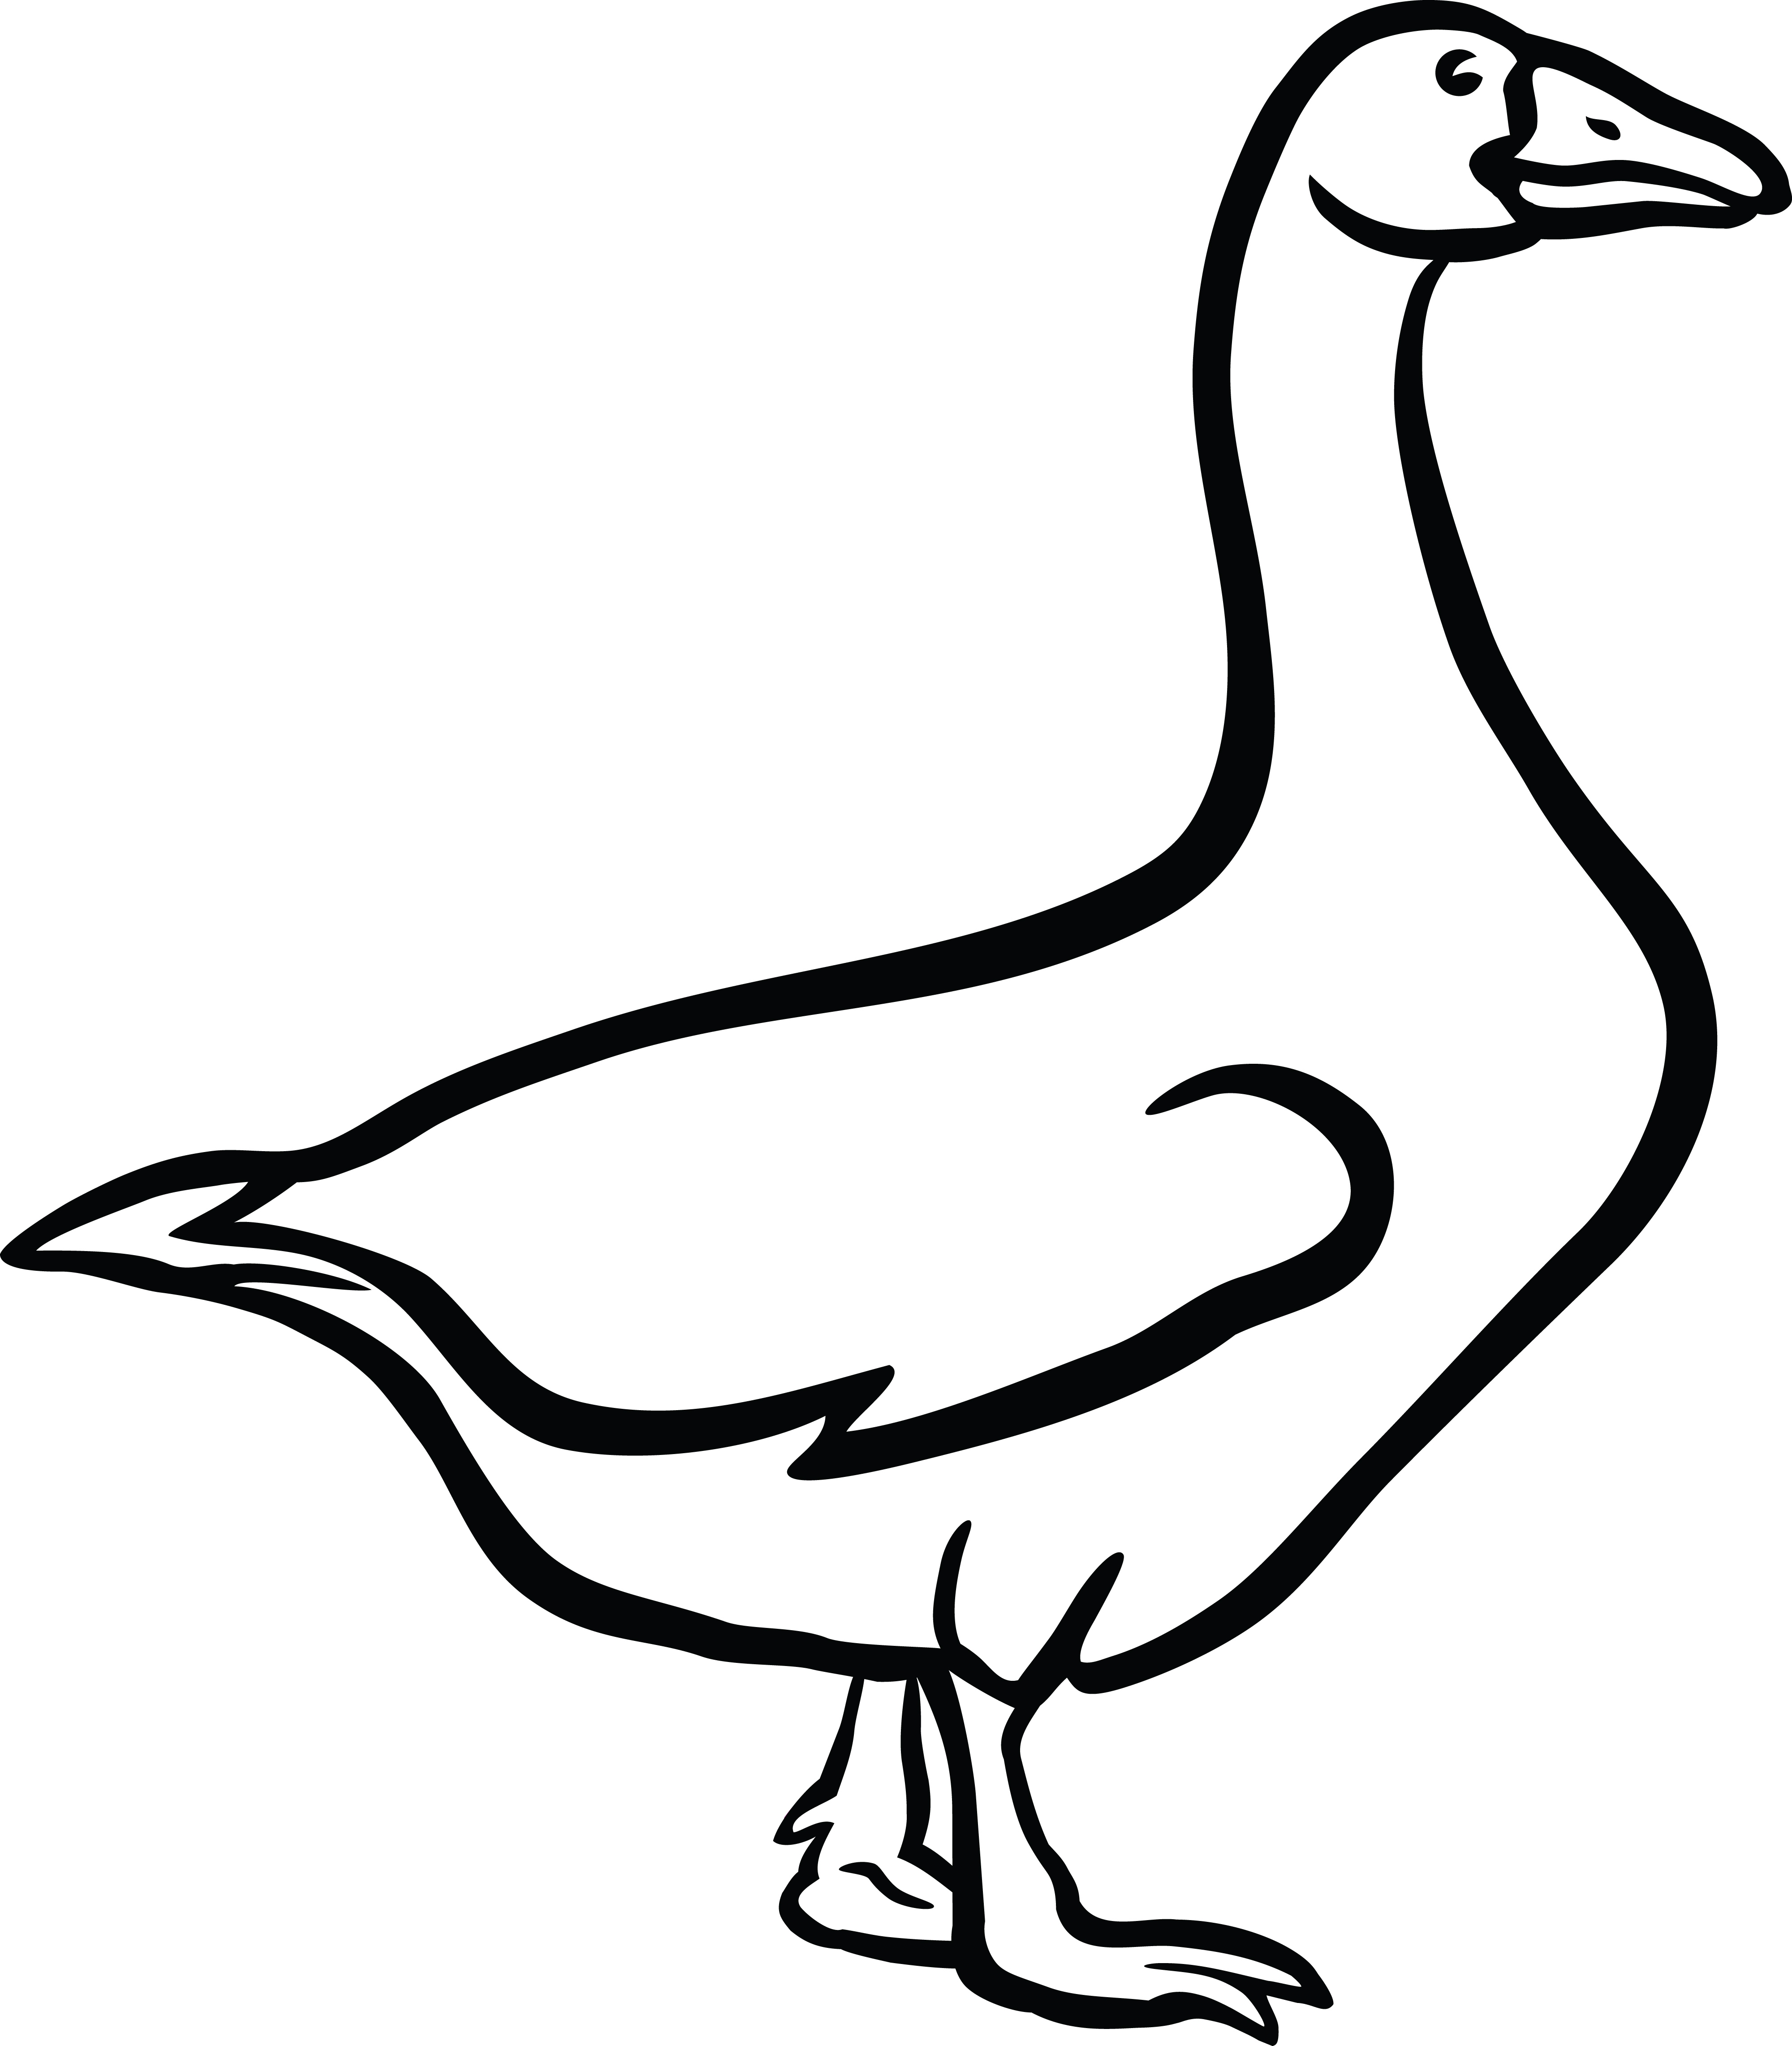 goose clipart black and white - photo #3